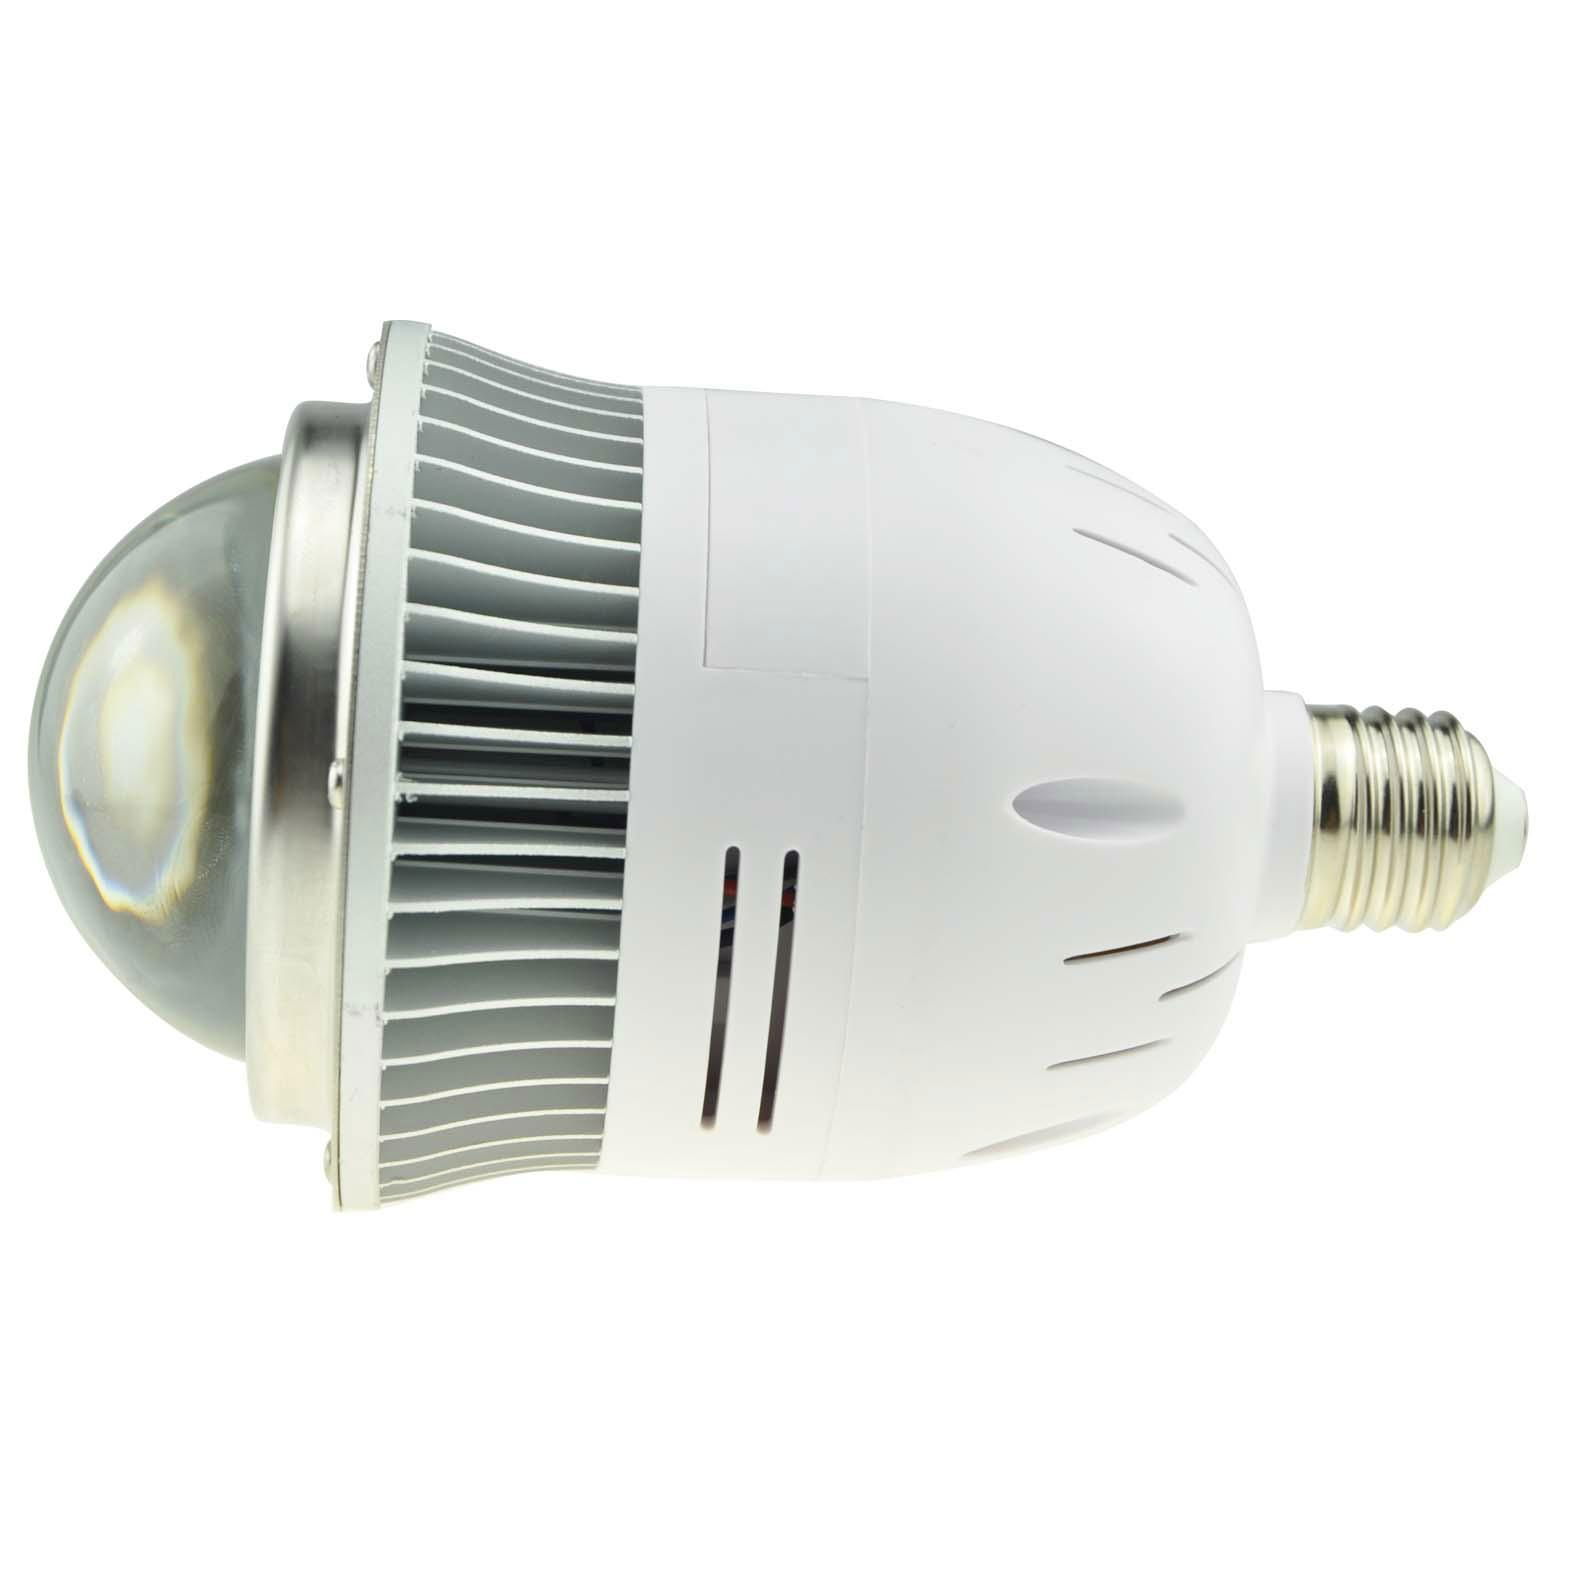 40 w LED E40 mining light can replace 125 w energy-saving lamps 4